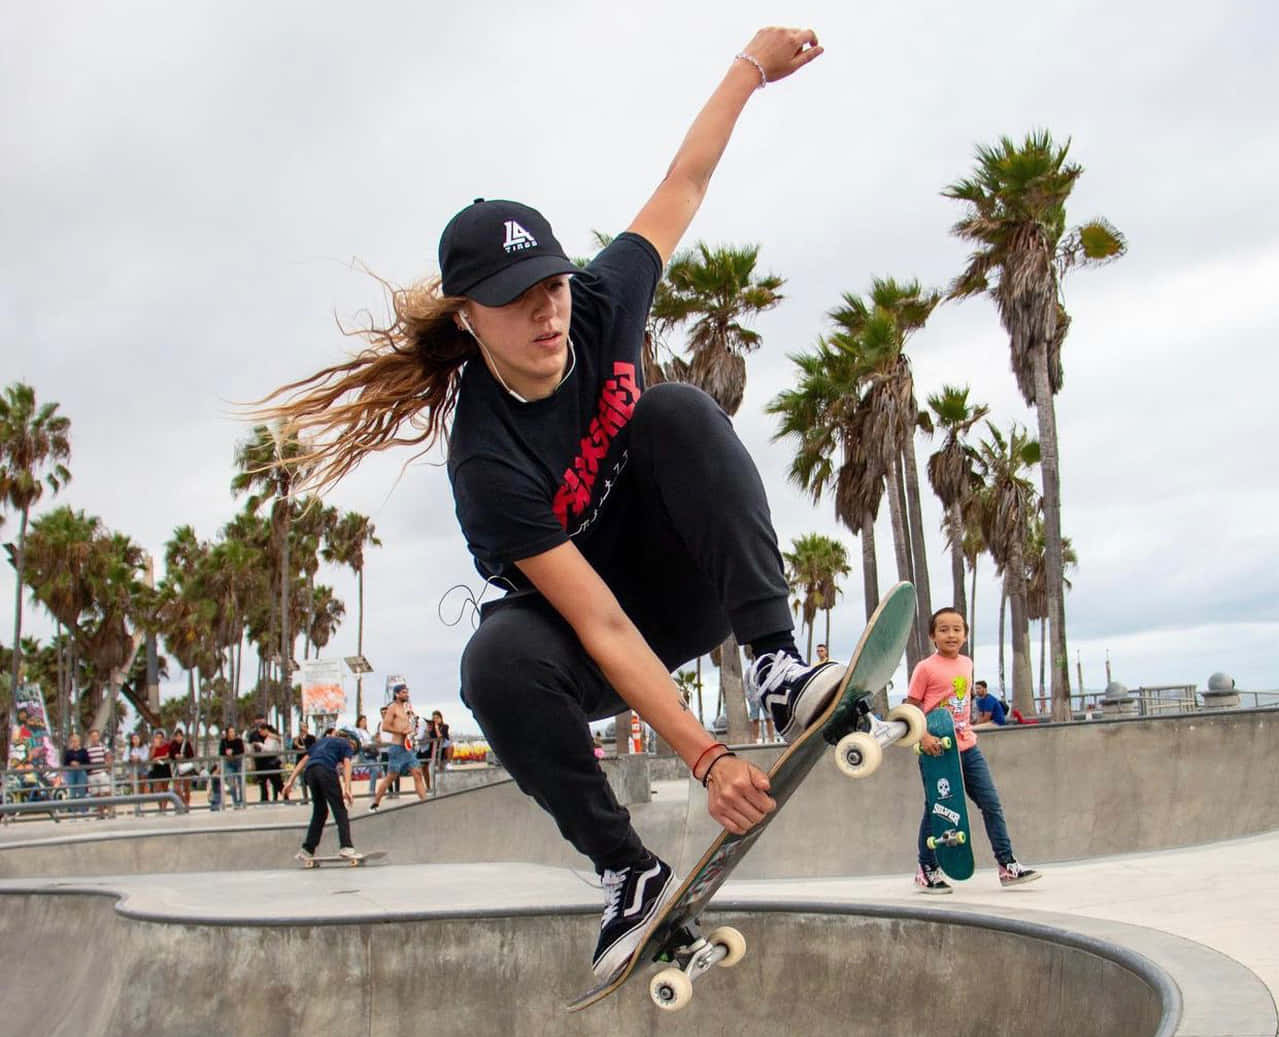 Take the next jump in your skateboarding skill set